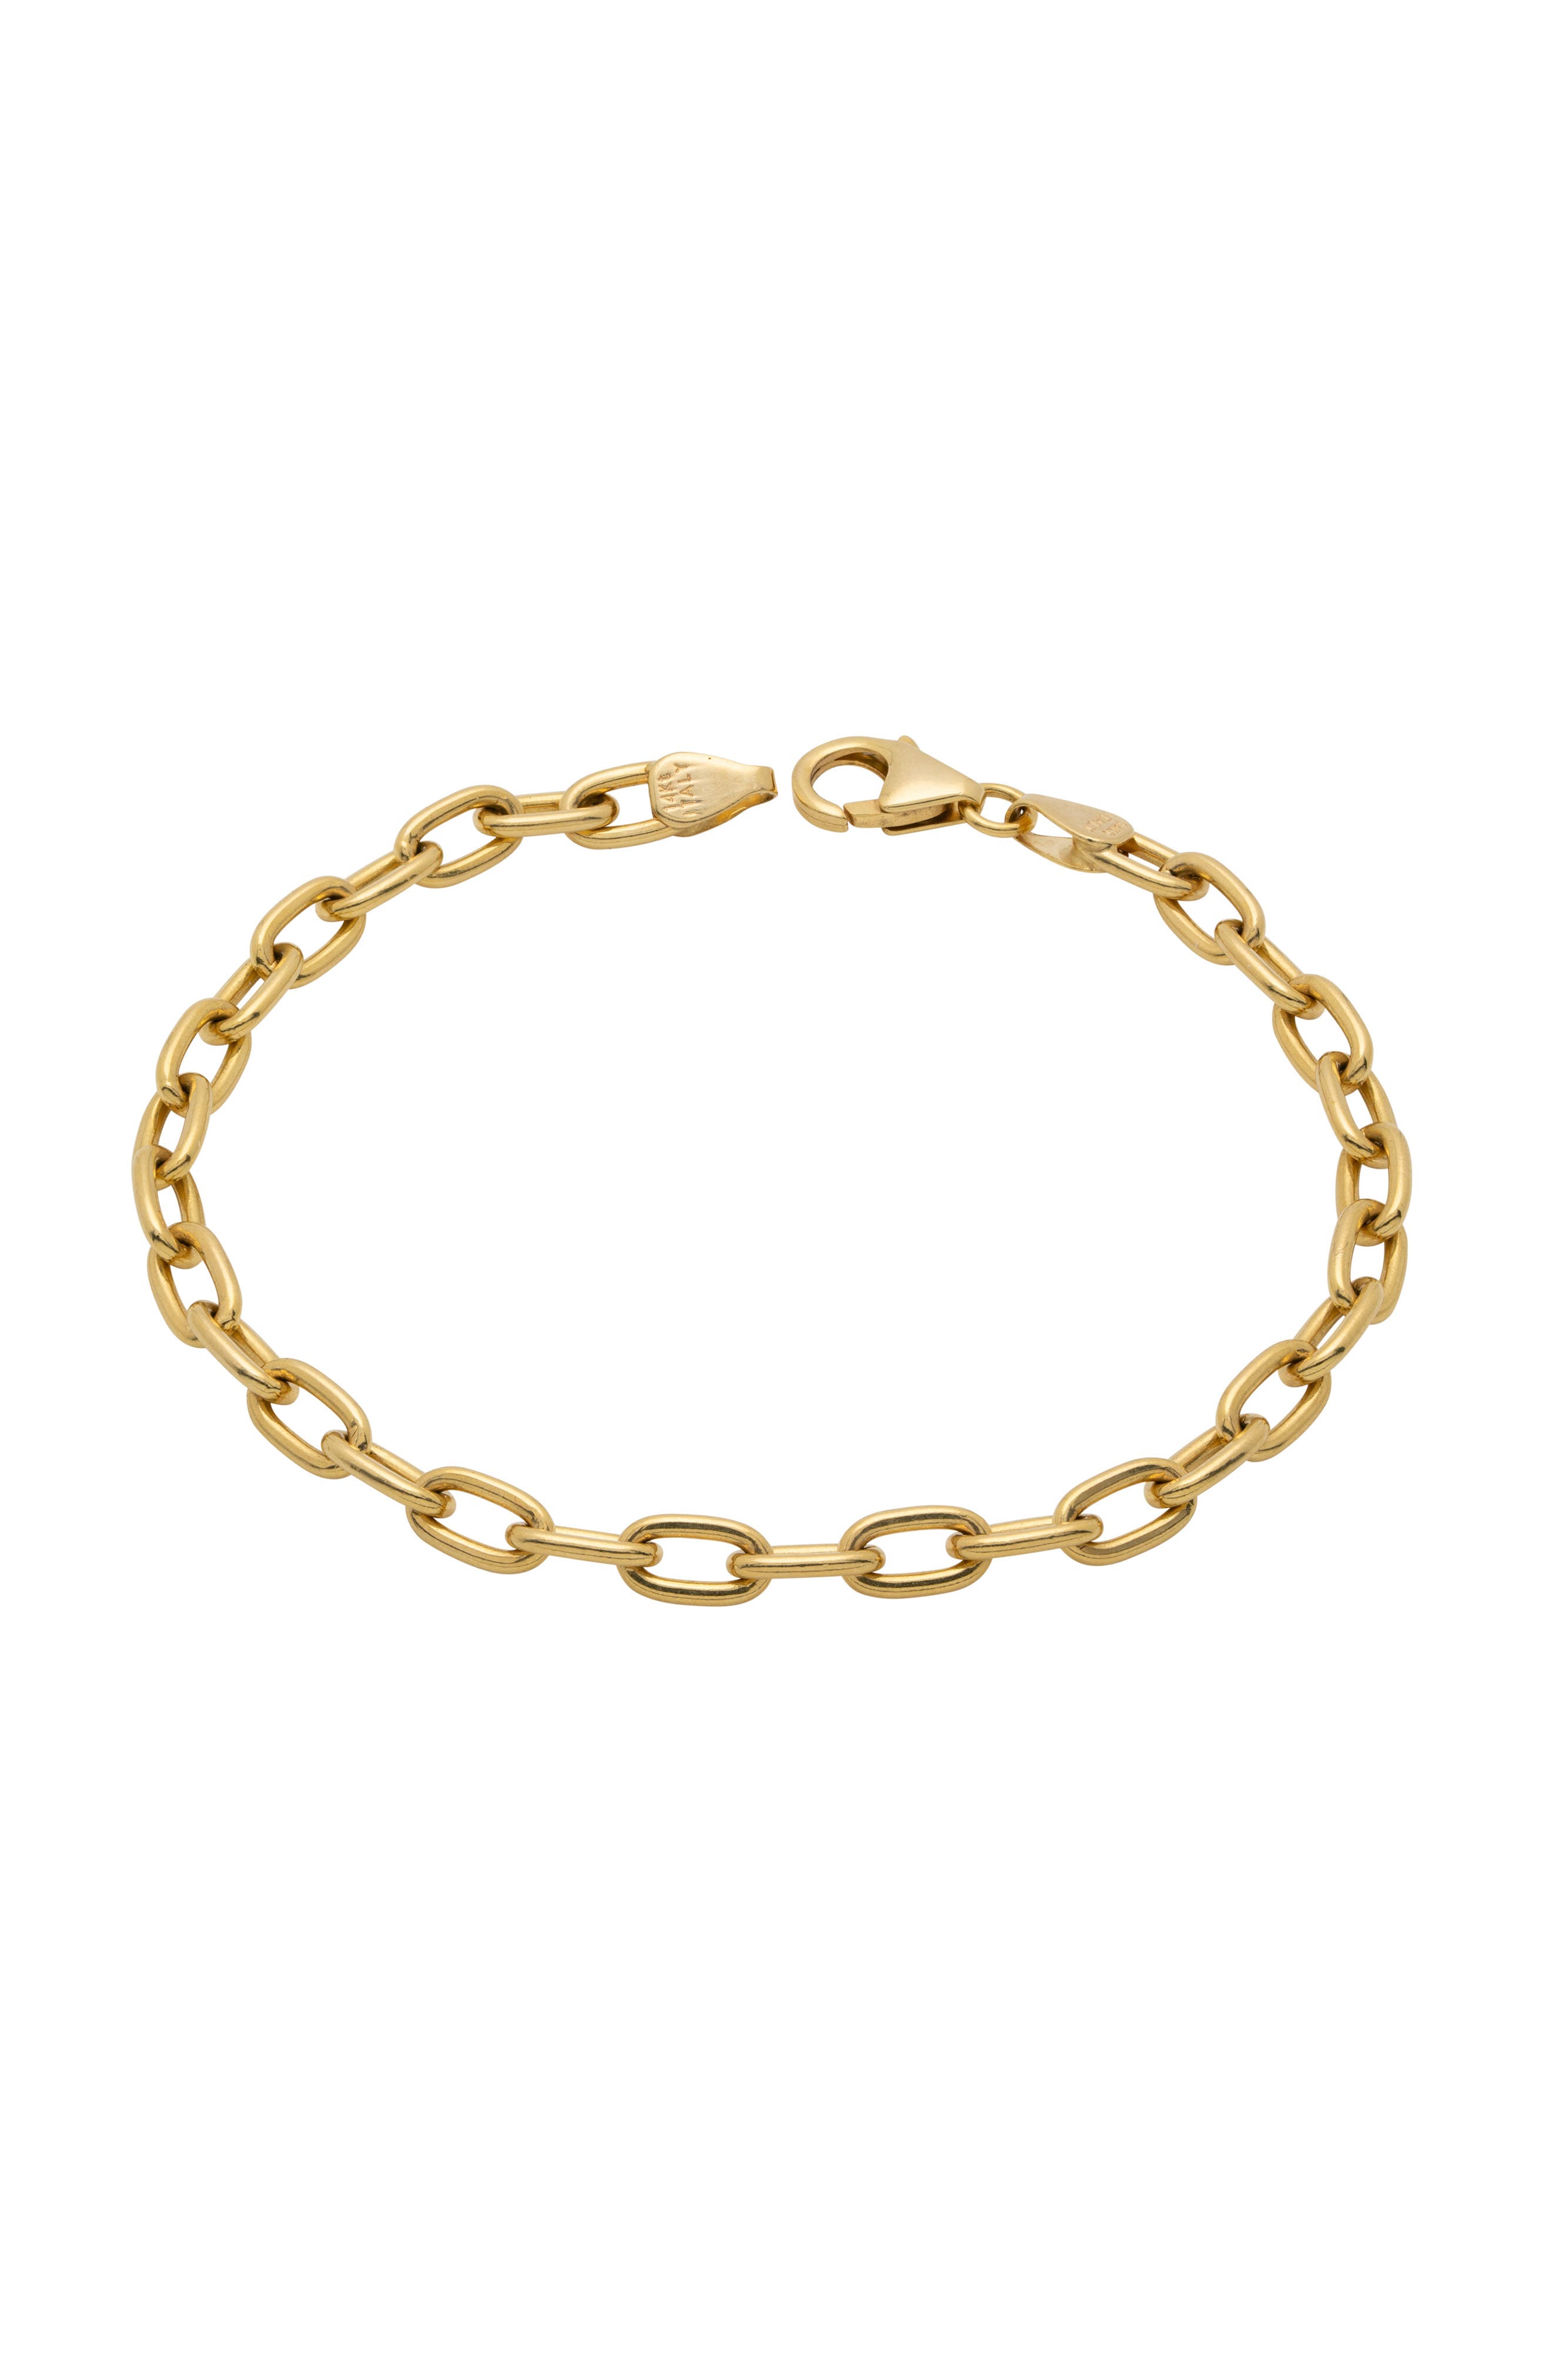 Dremmy Studios Dainty Chunky Link Chain Bracelet 18K Gold Filled Simple Wide Cuban Curb Chain Oval Bracelet Stacking Paperclip Chain Rolo Chain Bracelet for Women Minimalist Personalized Jewelry 